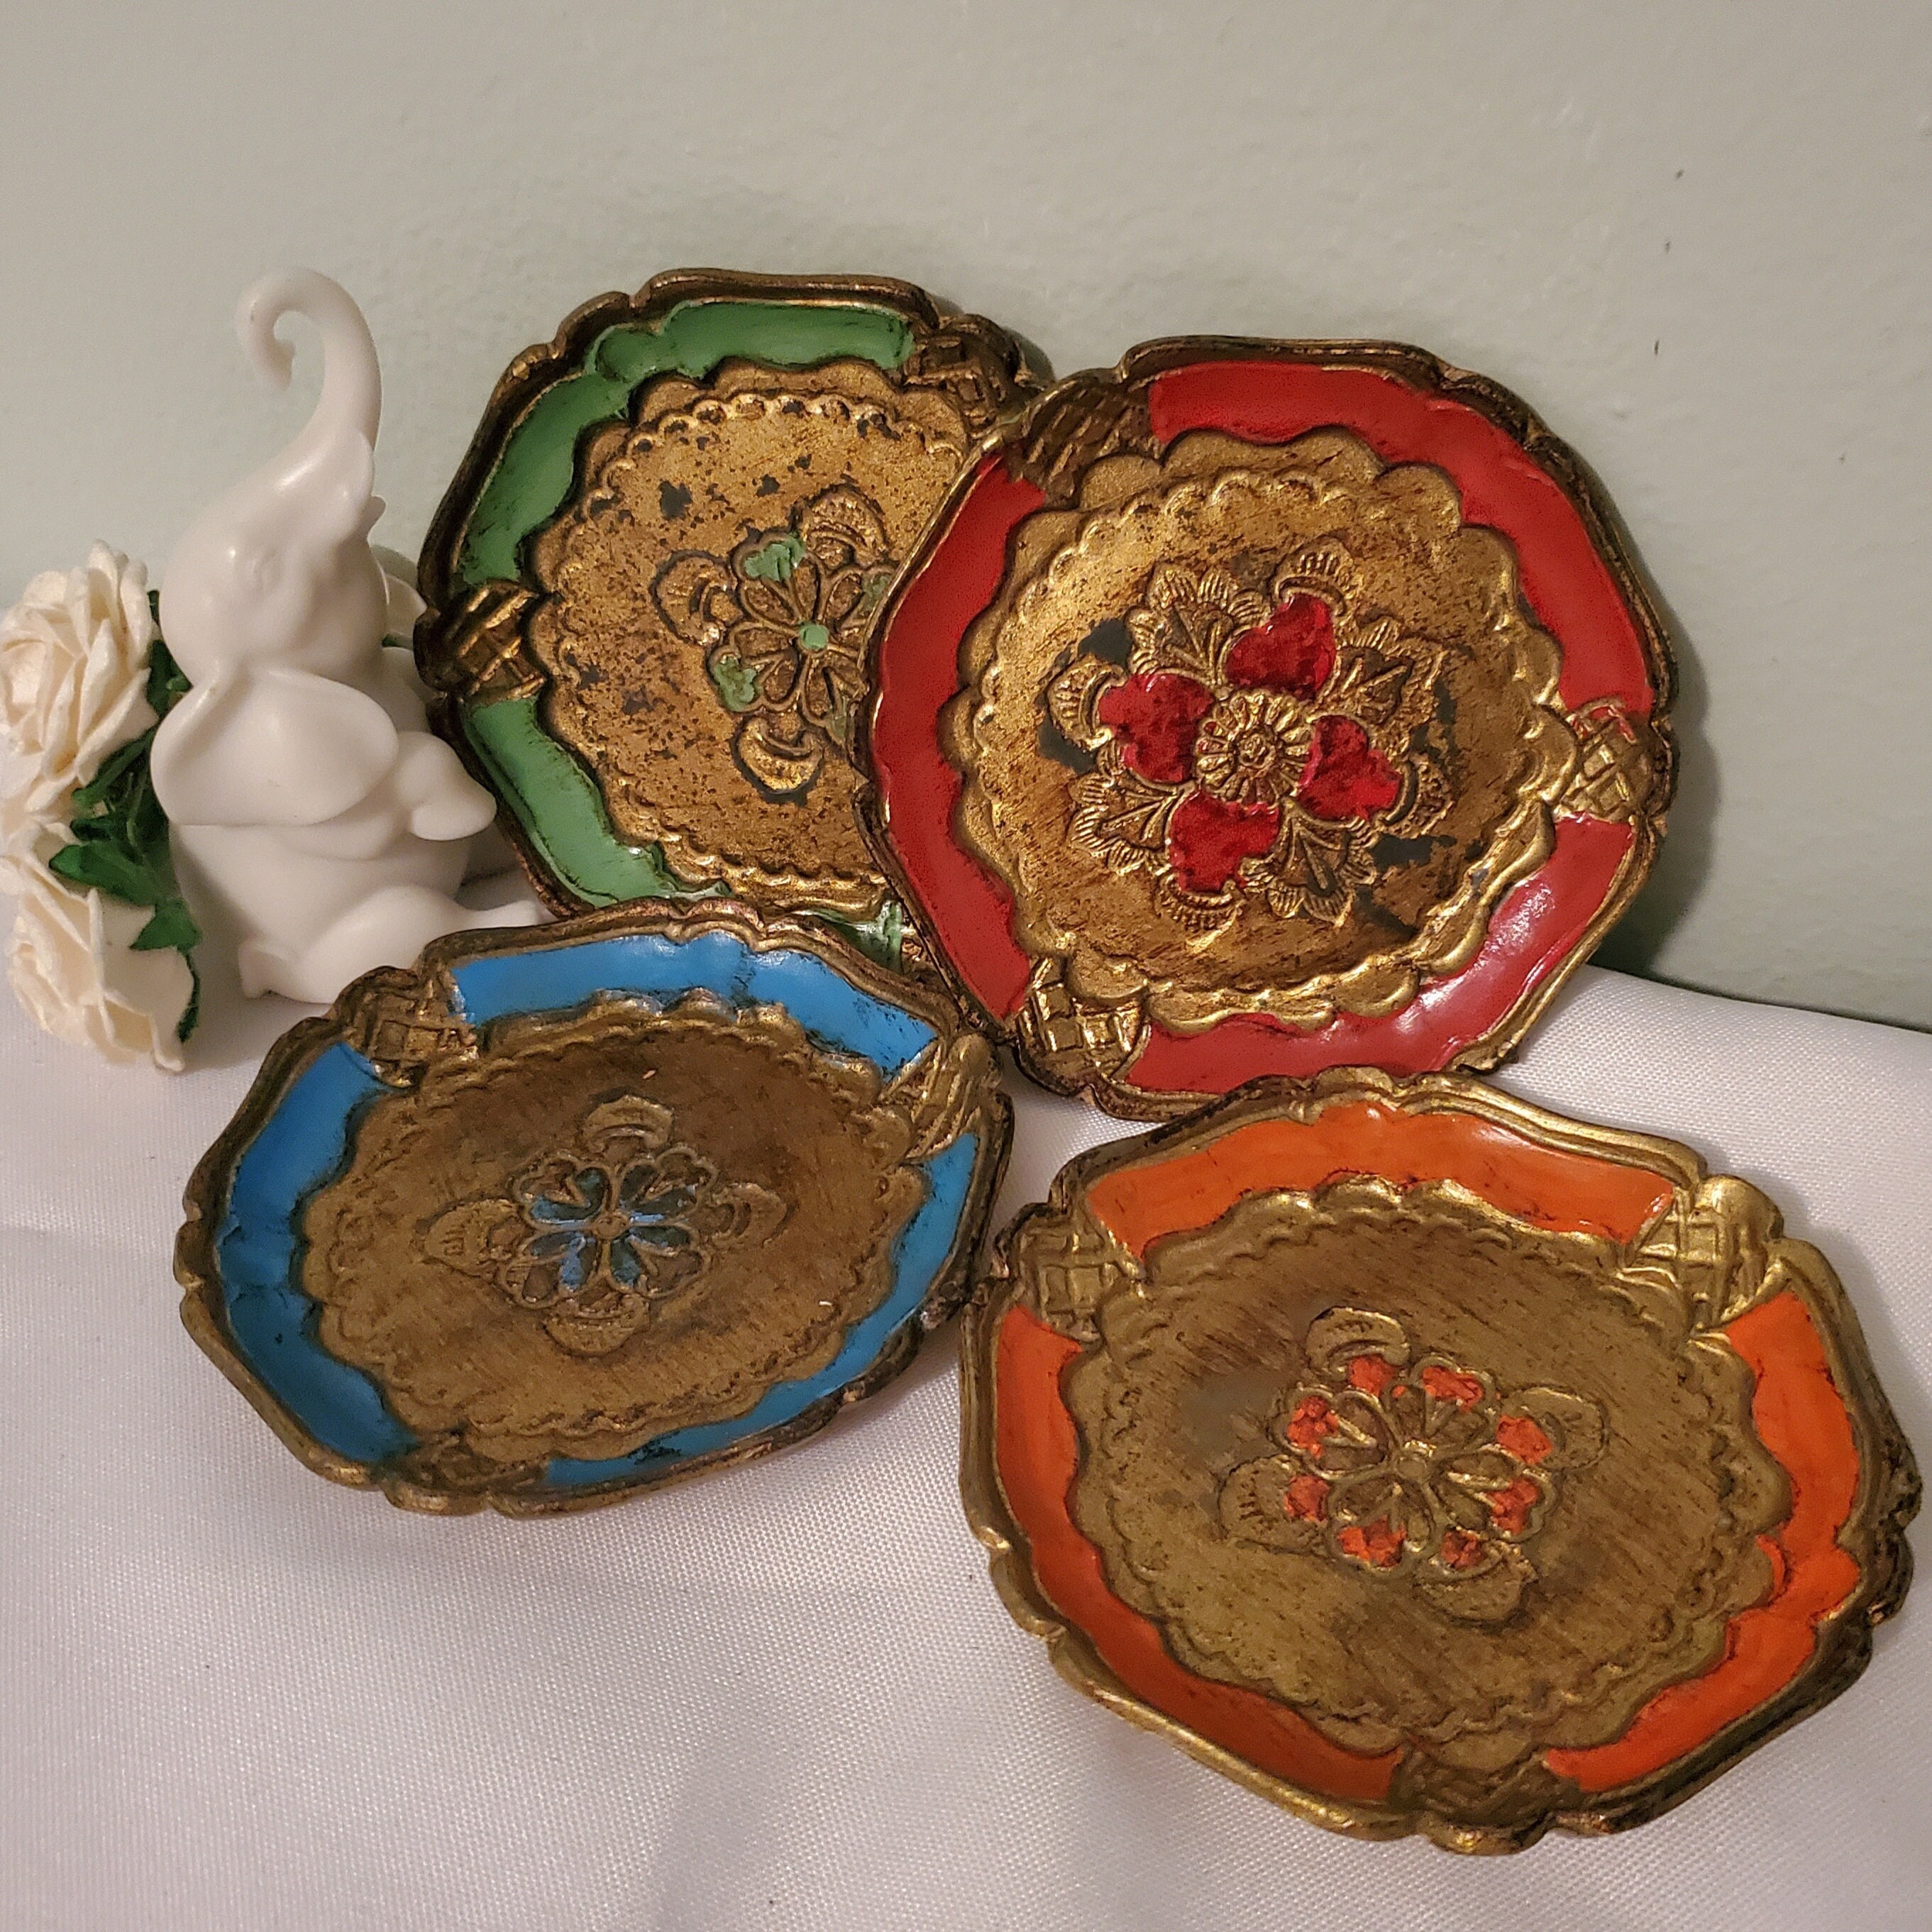 SET of 4 Trade Mark Made in Italy Italian Florentine Vintage